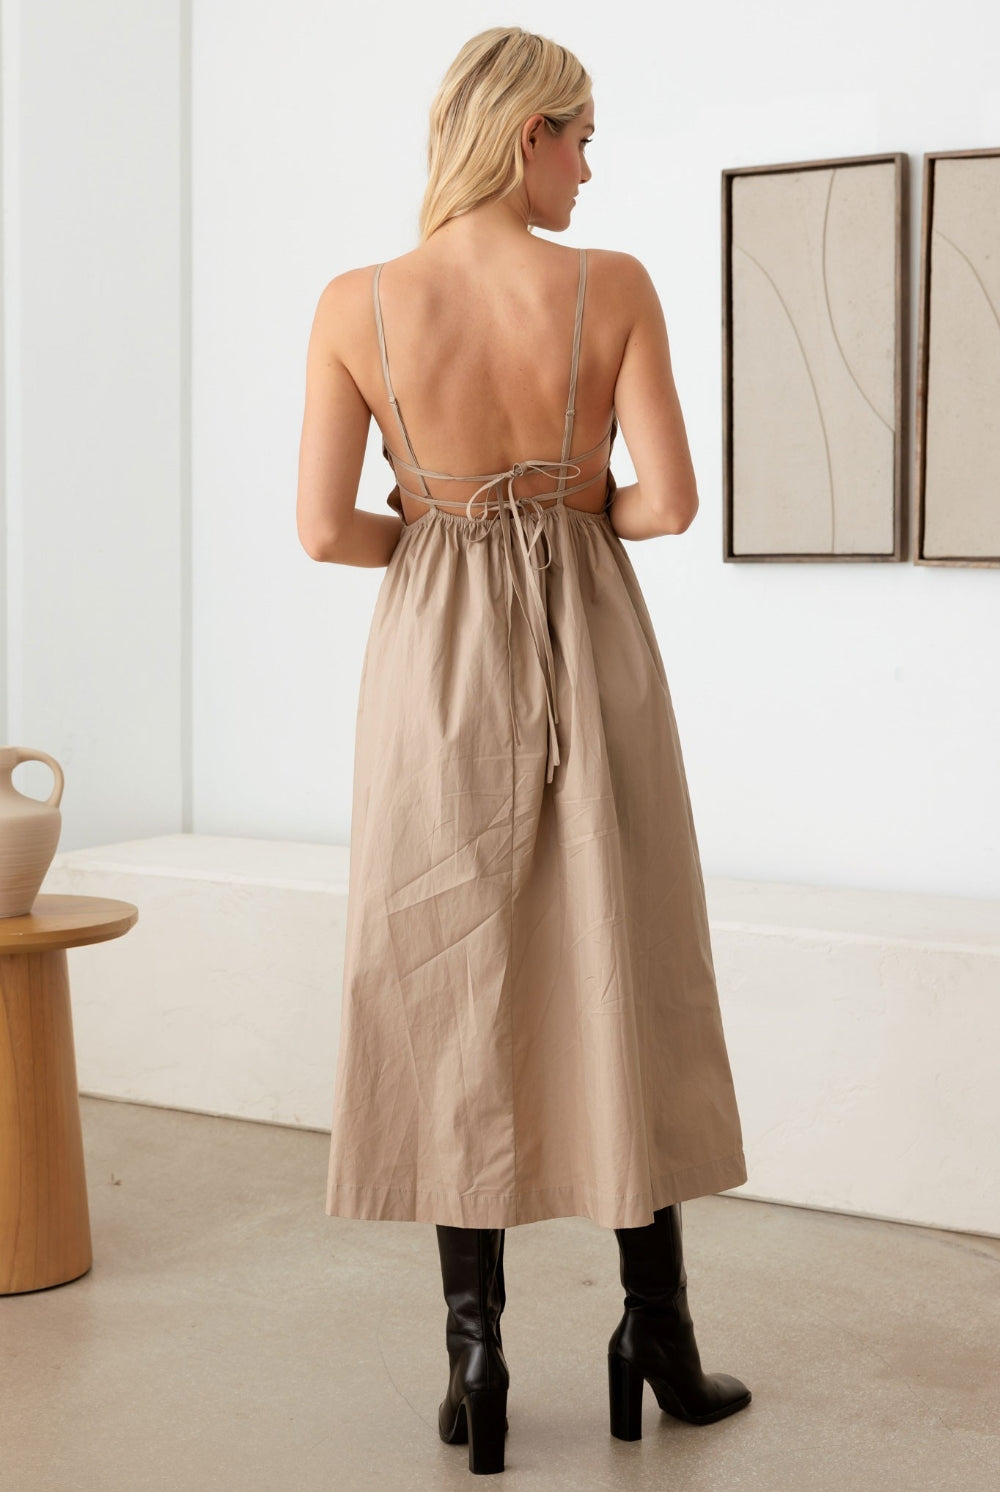 Stylish woman wearing a taupe cami dress with a tie back and open back, perfect for elegant outings.